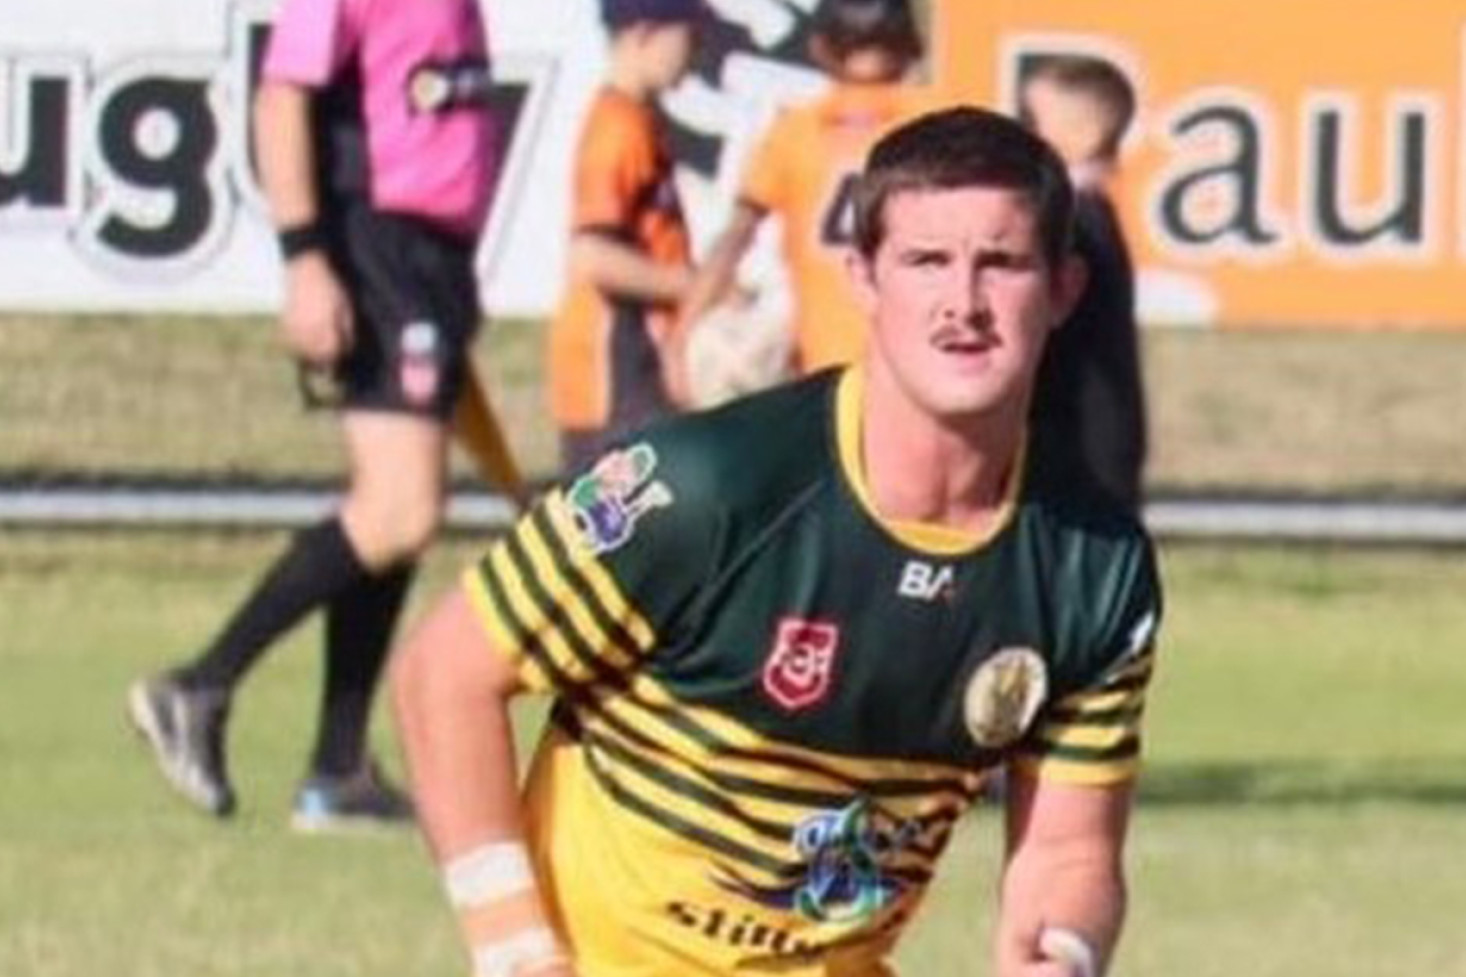 Front-rower Alex Donn took out player of the match honours in Wattles overwhelming 52 – 18 A Grade win over Oakey on Sunday.